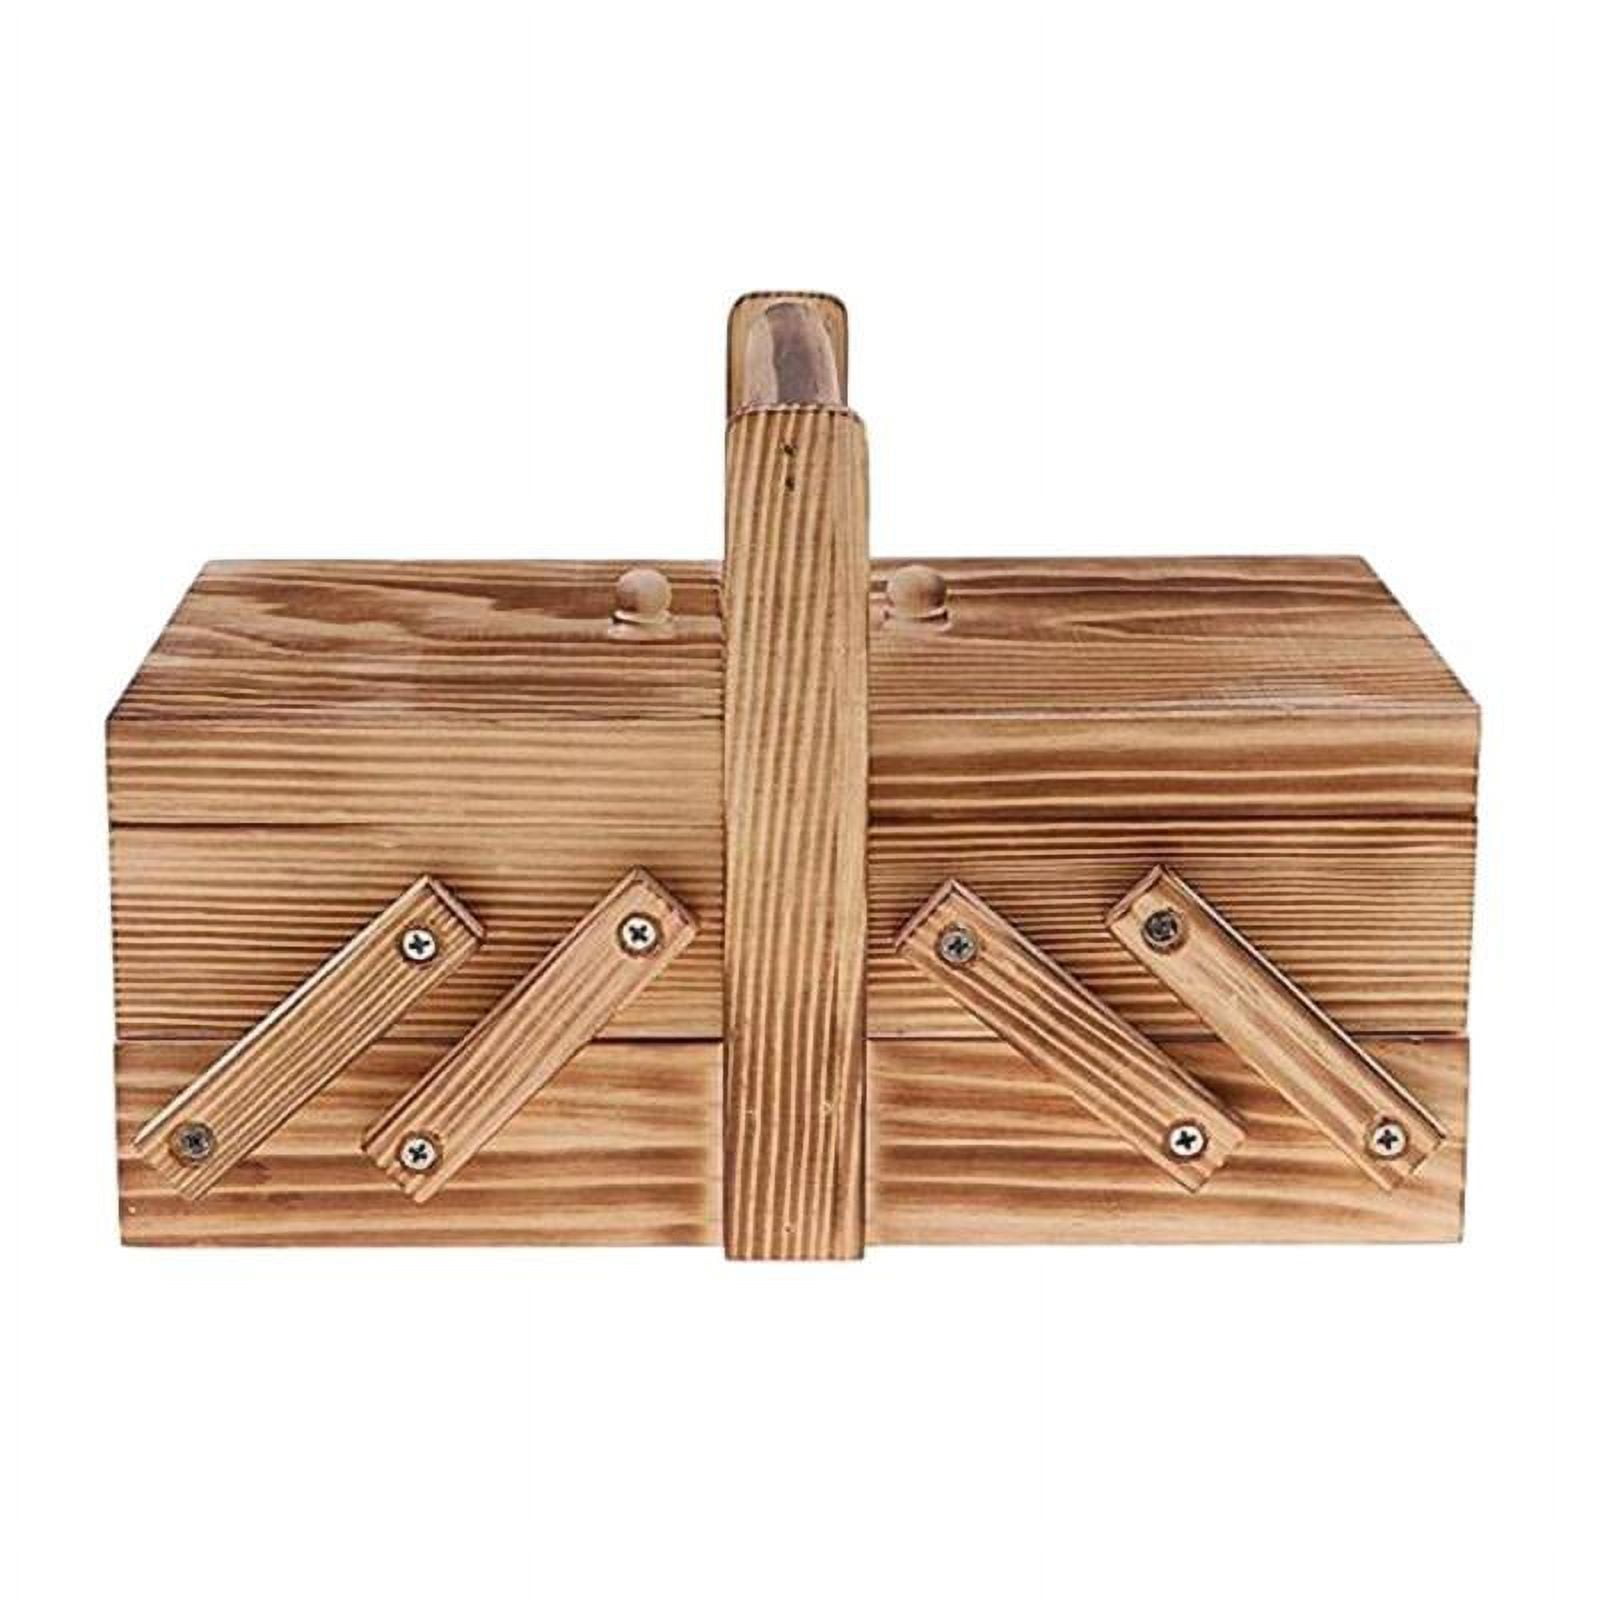 Sewing Kit for Adults - Wooden Sewing Box - Sewing Basket - Hand